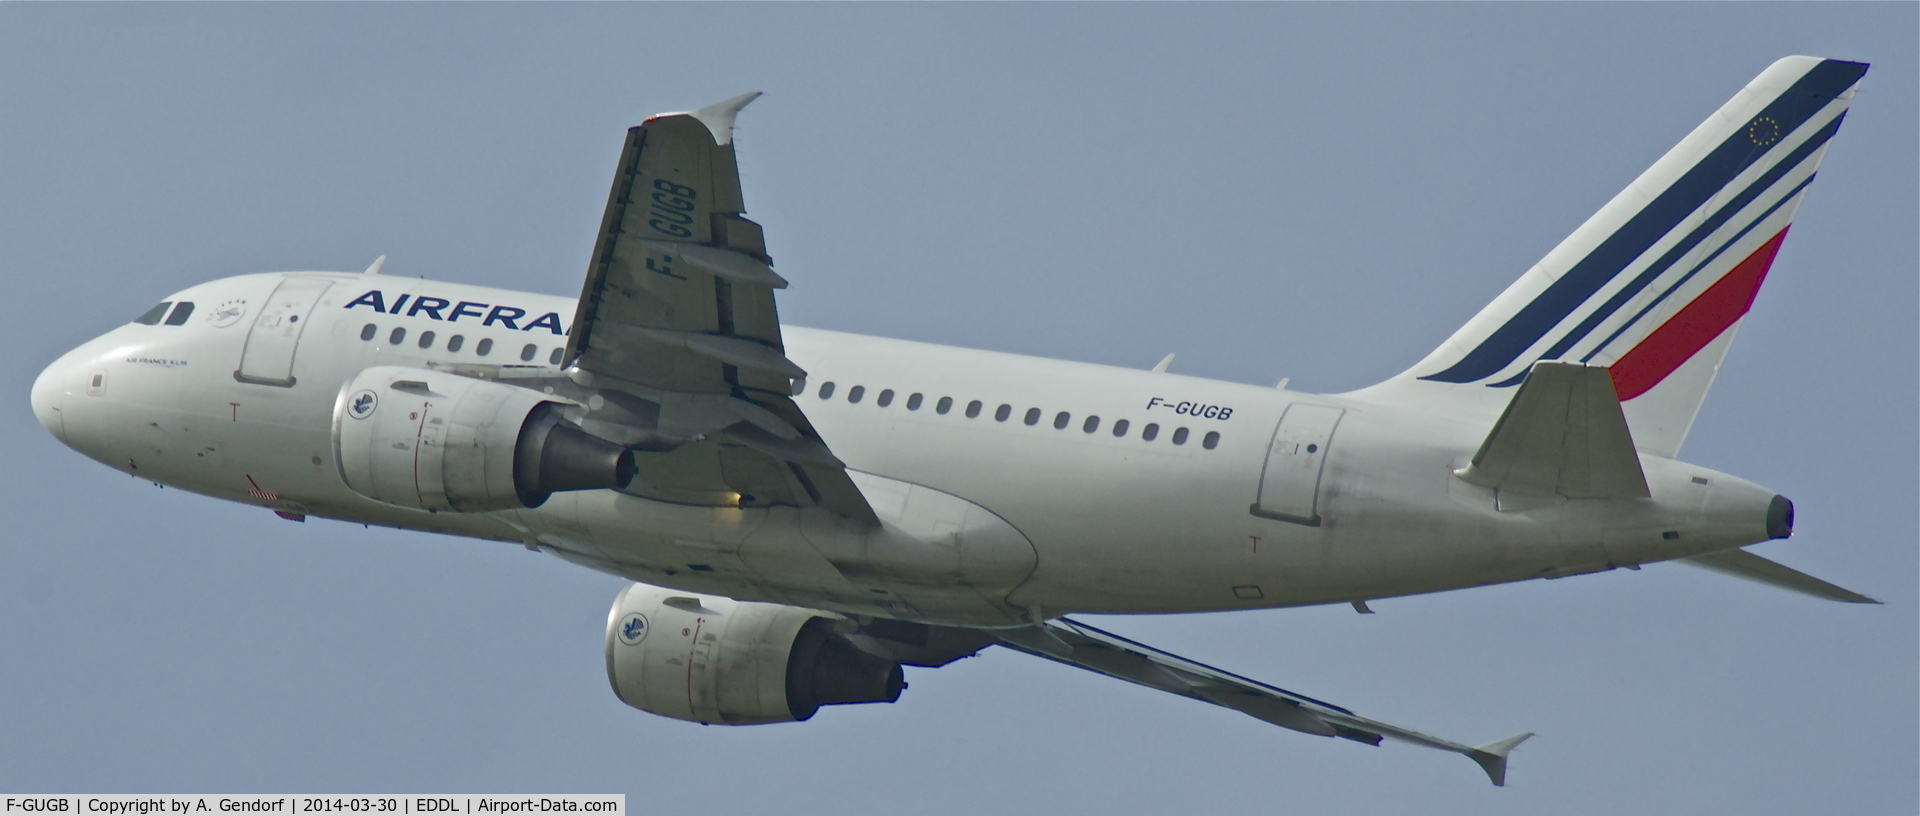 F-GUGB, 2003 Airbus A318-111 C/N 2059, Air France, seen here shortly after take off at Düsseldorf Int'l(EDDL)